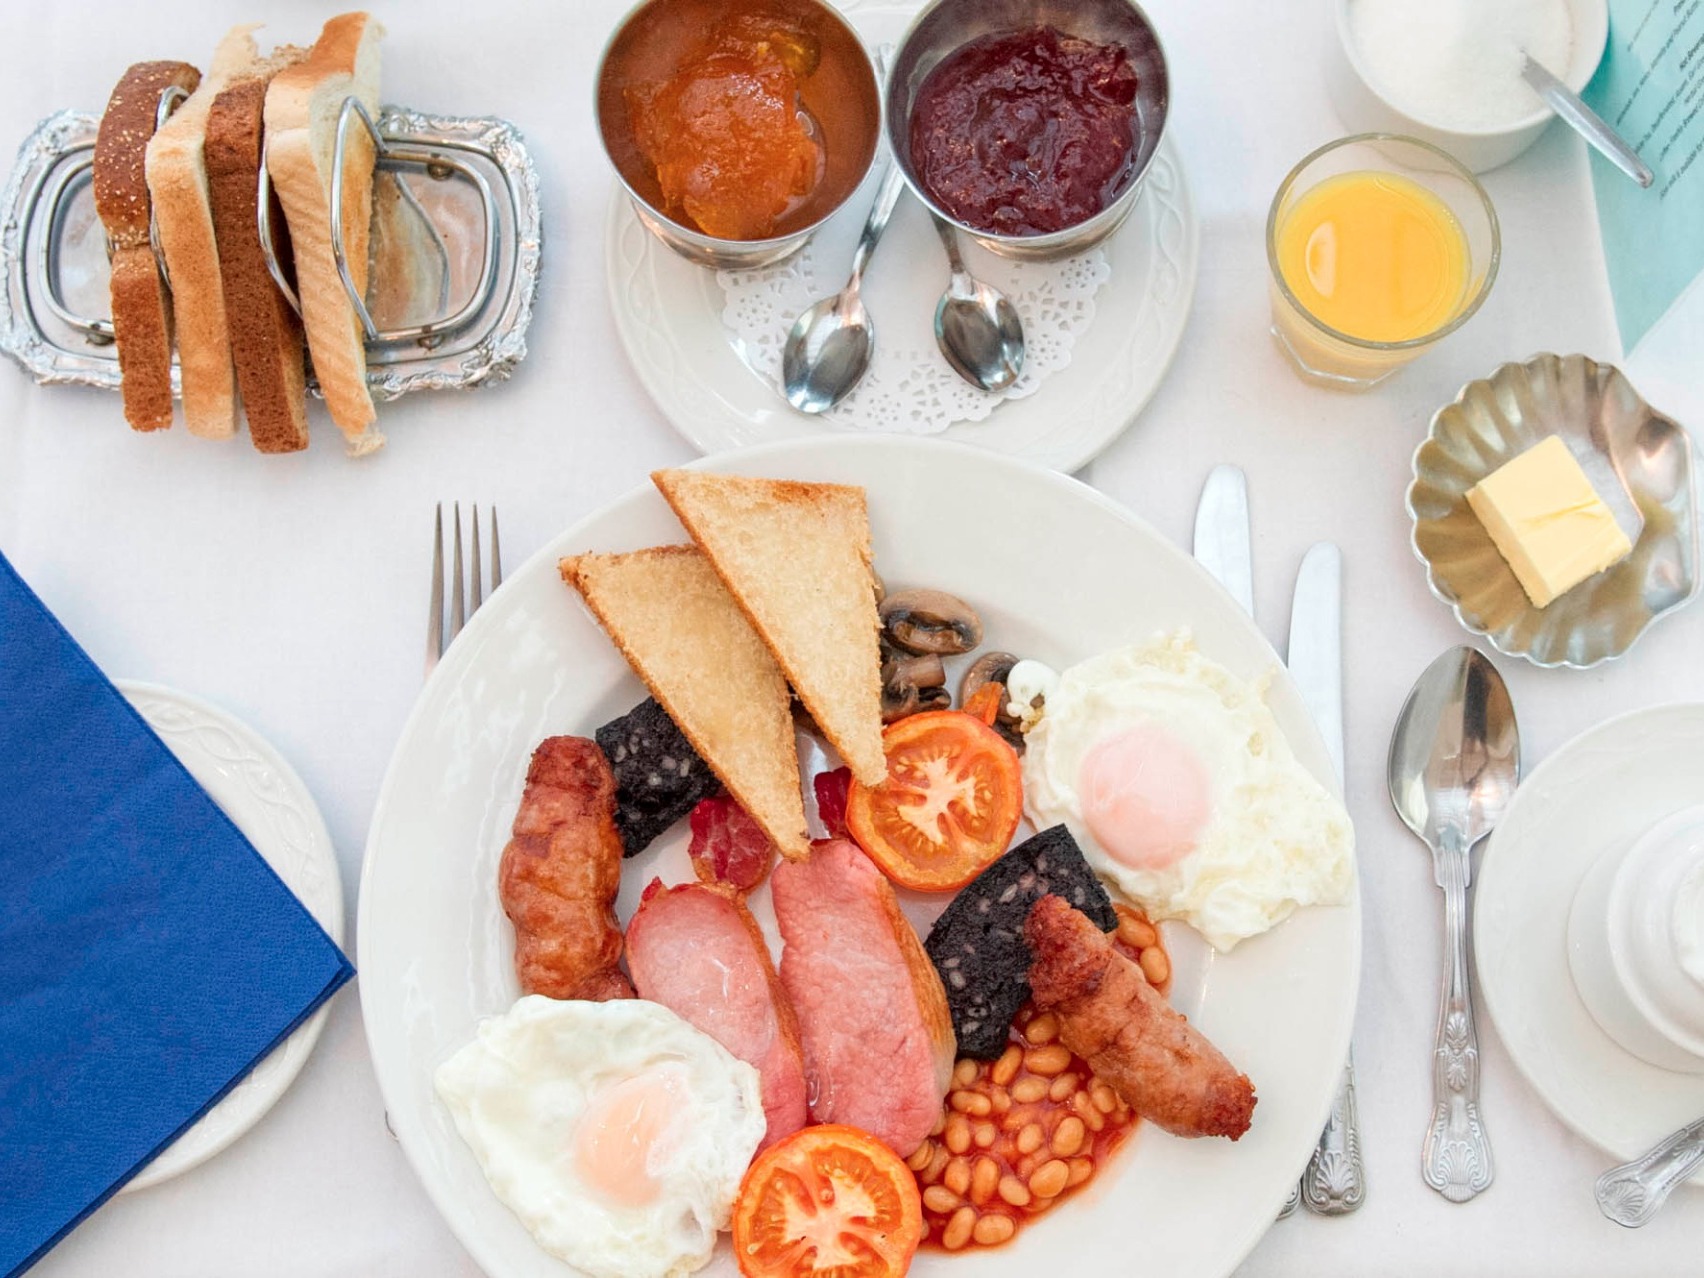 Full Yorkshire Breakfast is included in the room rate